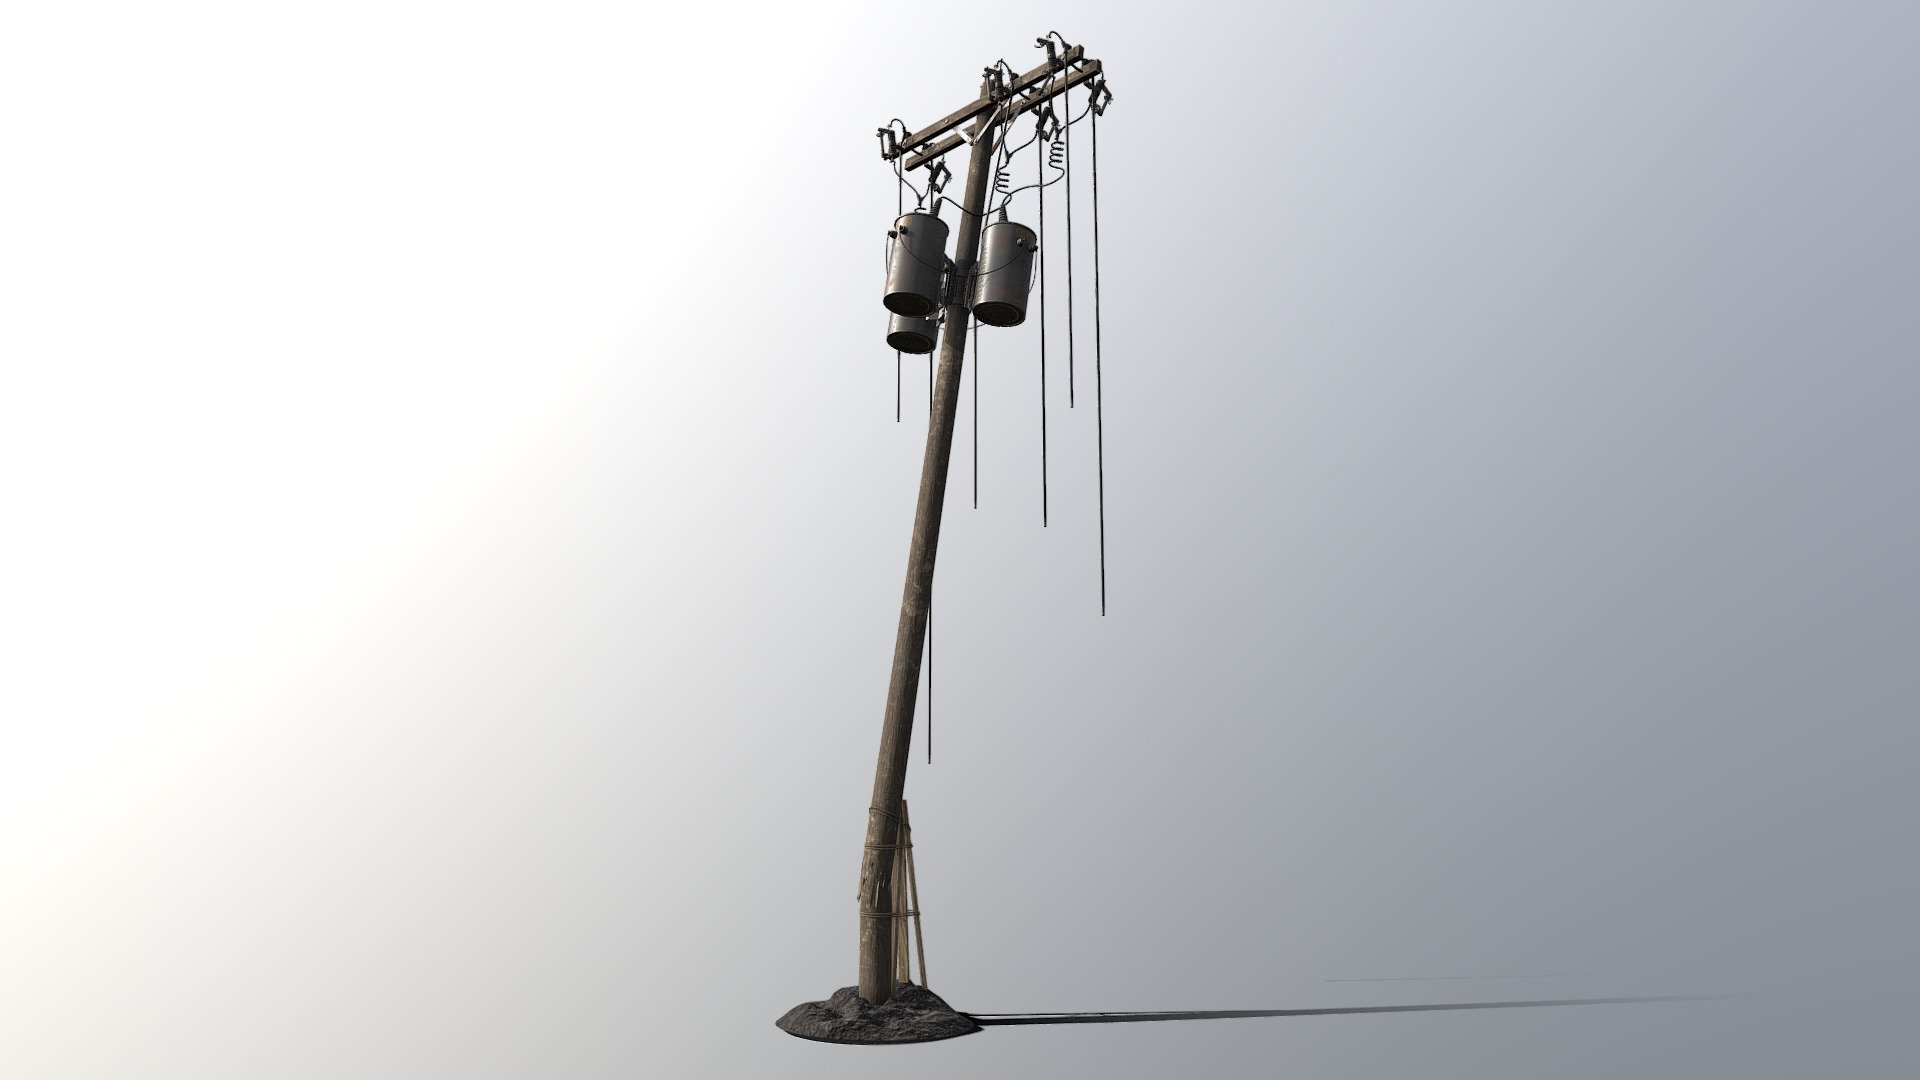 An old damaged utility pole with makeshift repairs, transformers, and pull fuses.

The mesh is split into individual components parented to an empty object for easy manipulation but joining them into a single mesh is trivial. The ground object is designed to sink a little into another ground object to look like turned dirt around the base.

Includes 2k PBR materials in PNG with 8 and 16bit OpenGL normal maps.

2020.2 HDRP Unity Package Included

Texel Density
GroundDirt            2.43td :: 512px
PoleWires             4.66td :: 2048px
UtilityPoleEquipment  7.16td :: 2048px
 - BrokenUtilityPole - Download Free 3D model by HippoStance 3d model